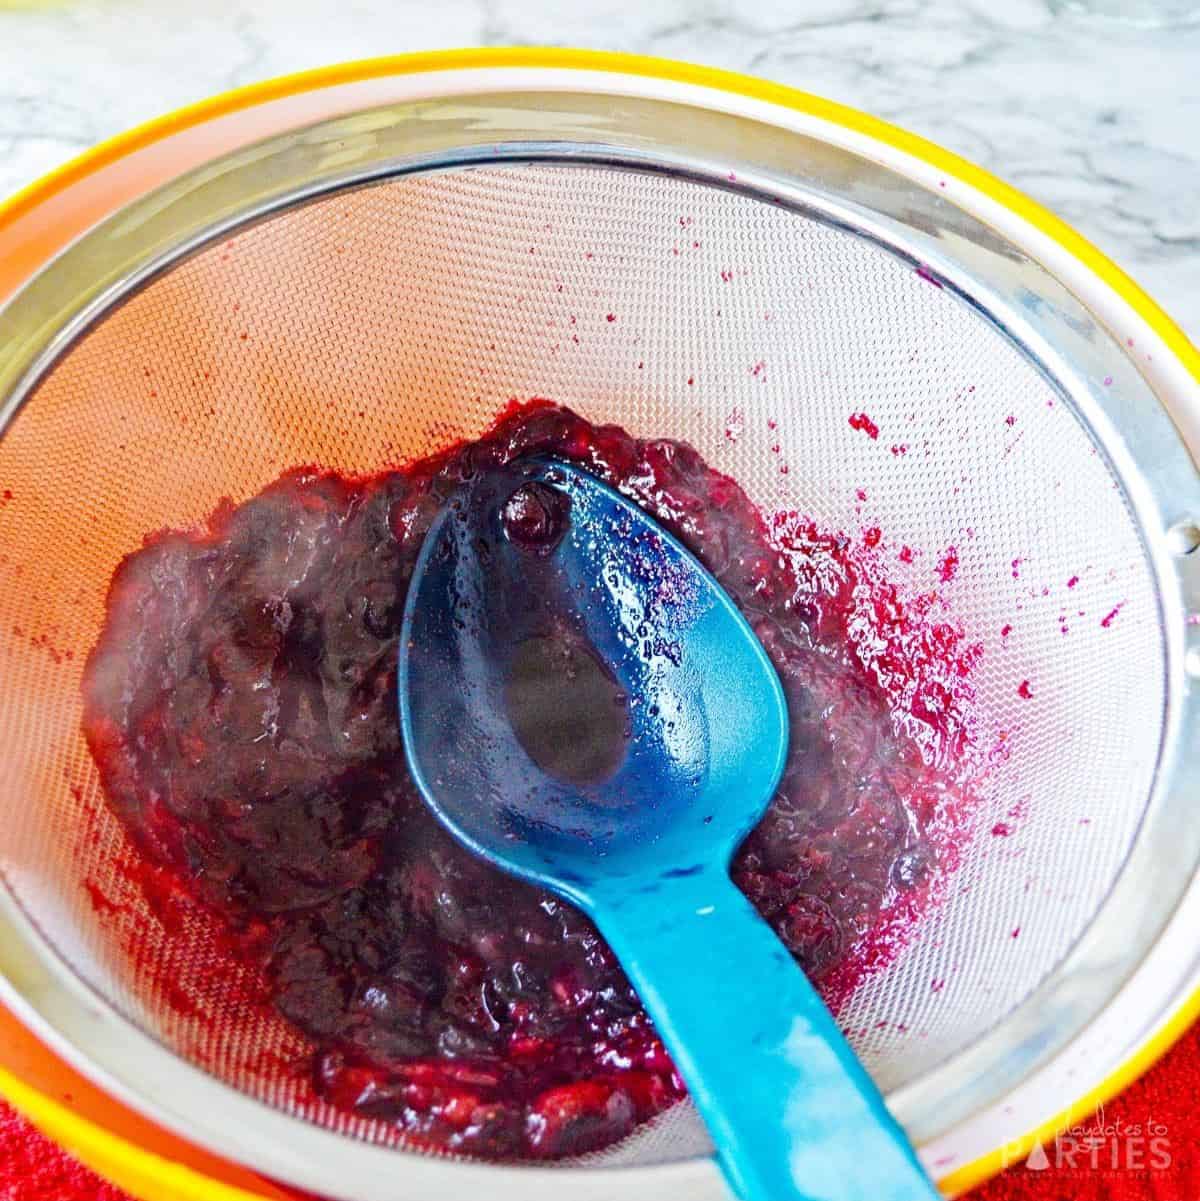 How to make blueberry syrup for mimosas step 5.